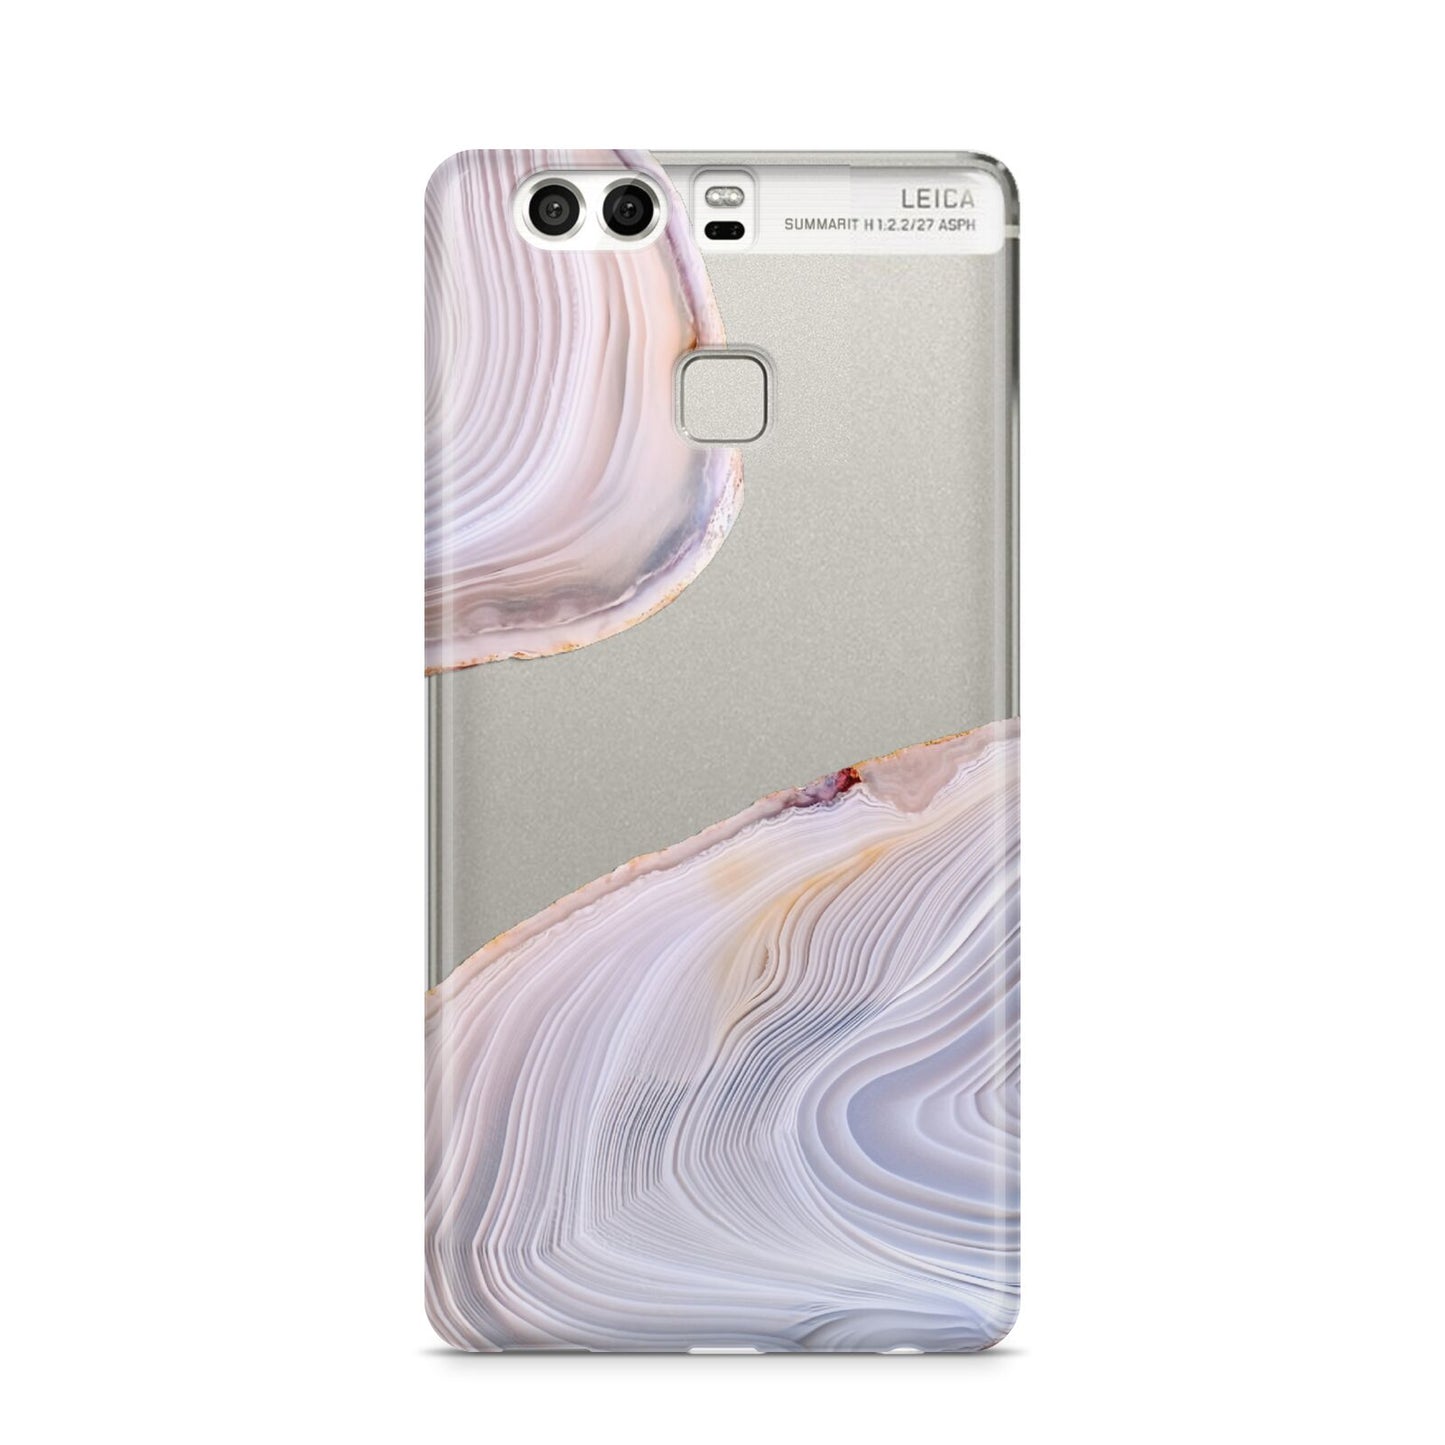 Agate Pale Pink and Blue Huawei P9 Case